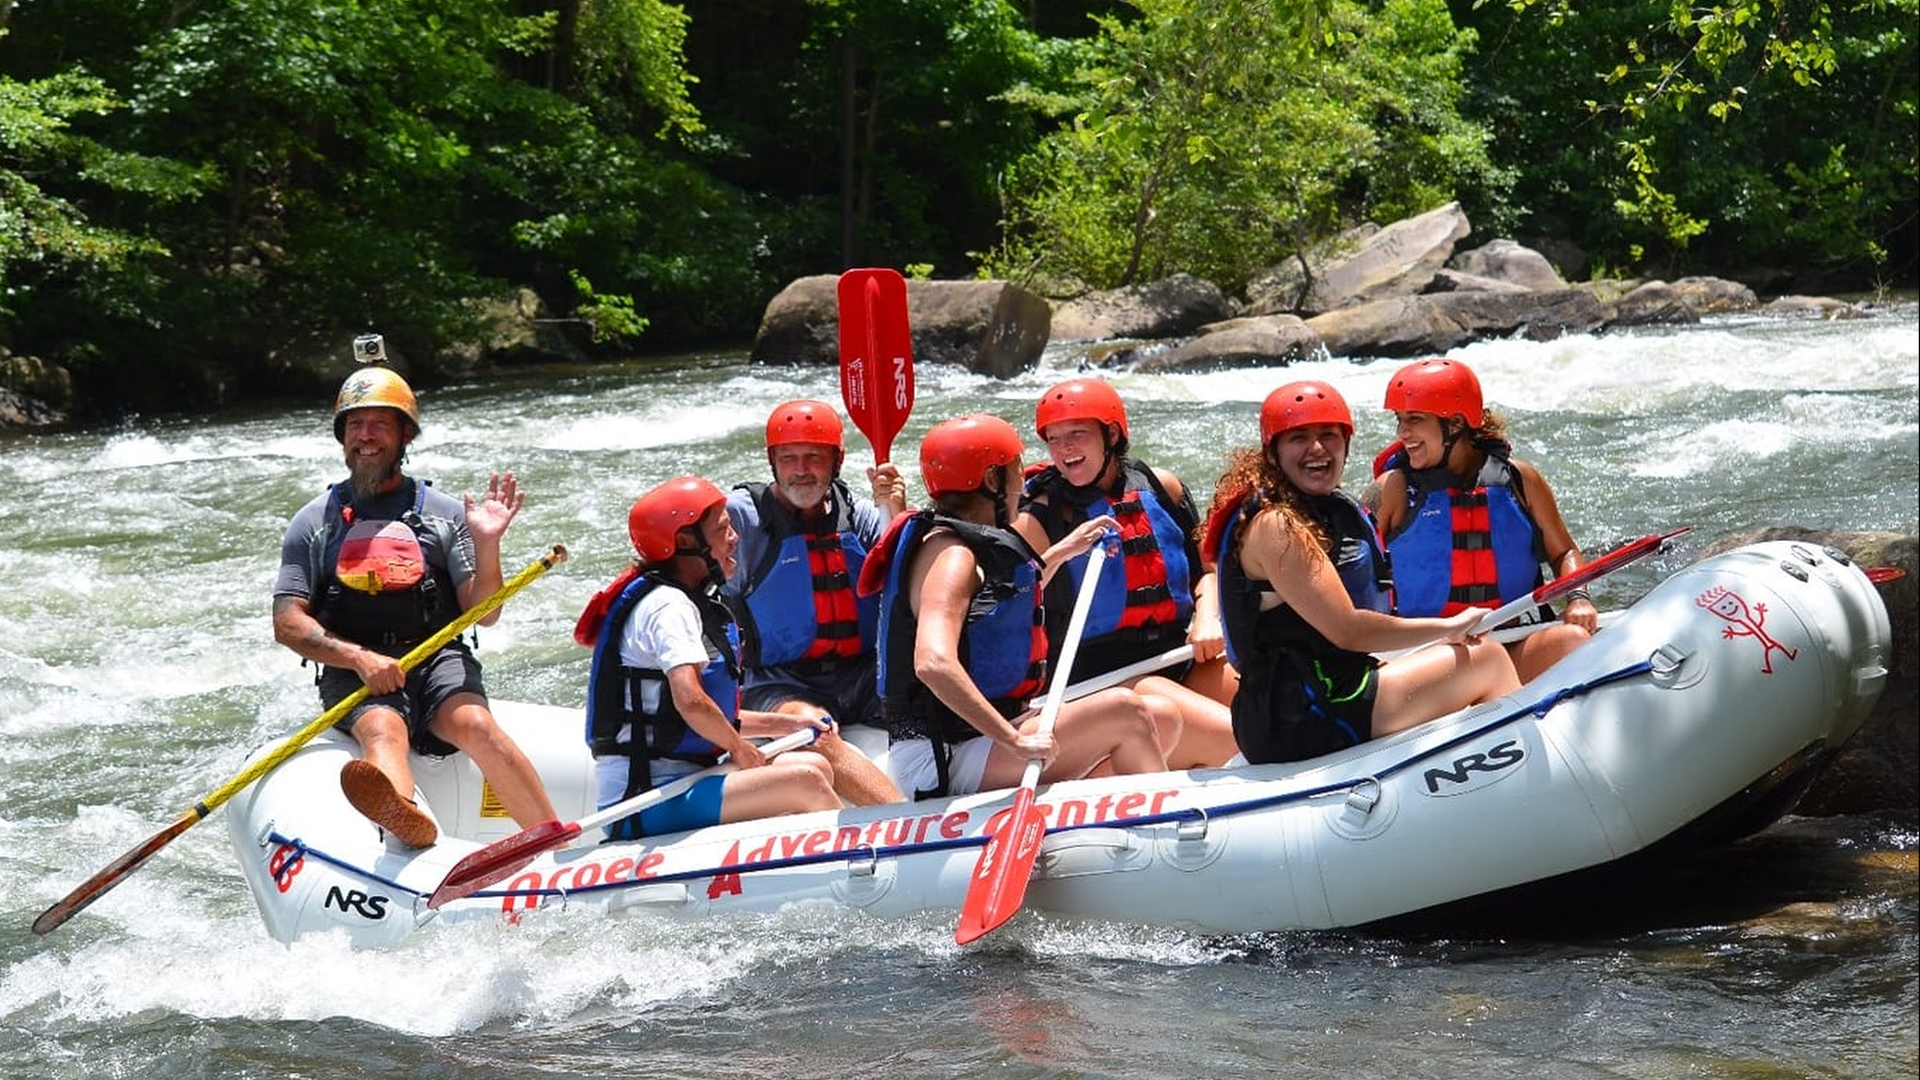 Family style rafting fun on the Middle Ocoee section of the Ocoee River with Fast Fred Ruddock